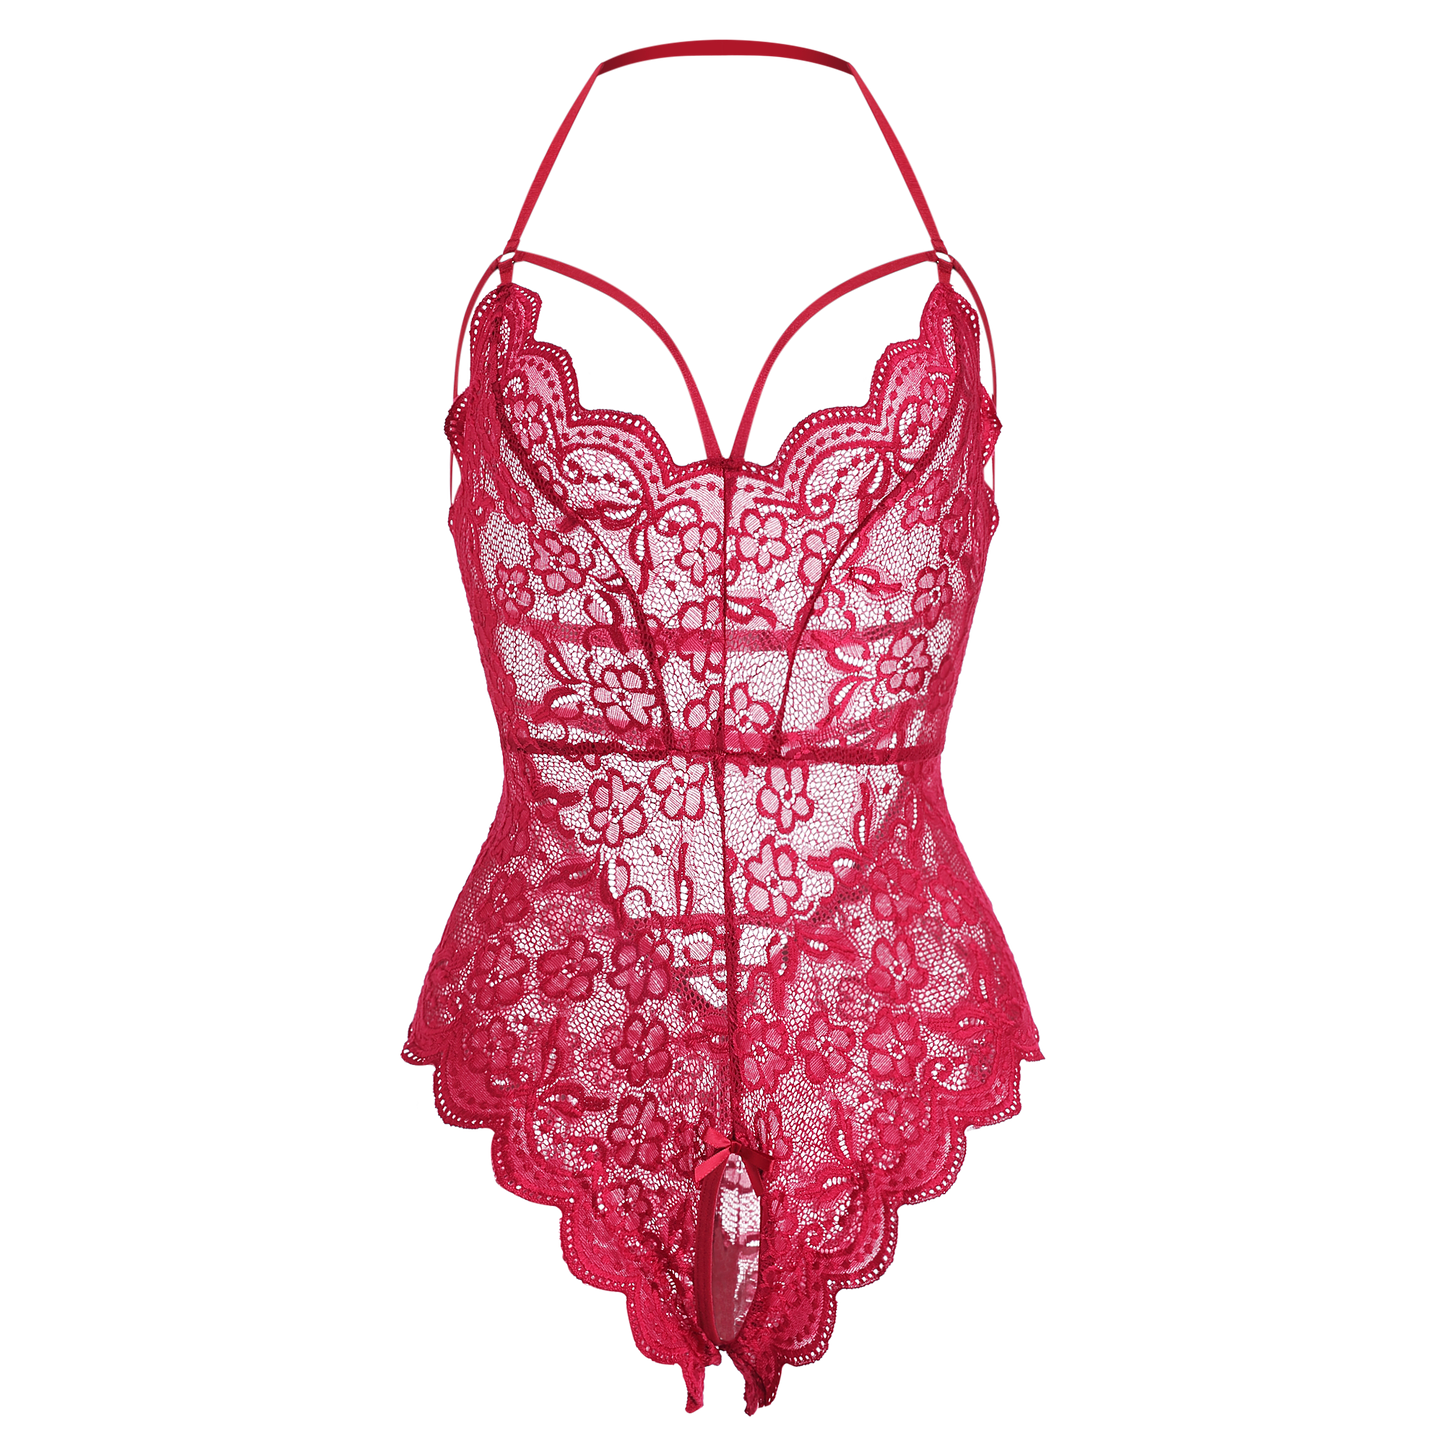 Sexy Red Hot Lace Bodysuit for Women – Sensual One-Piece Lingerie